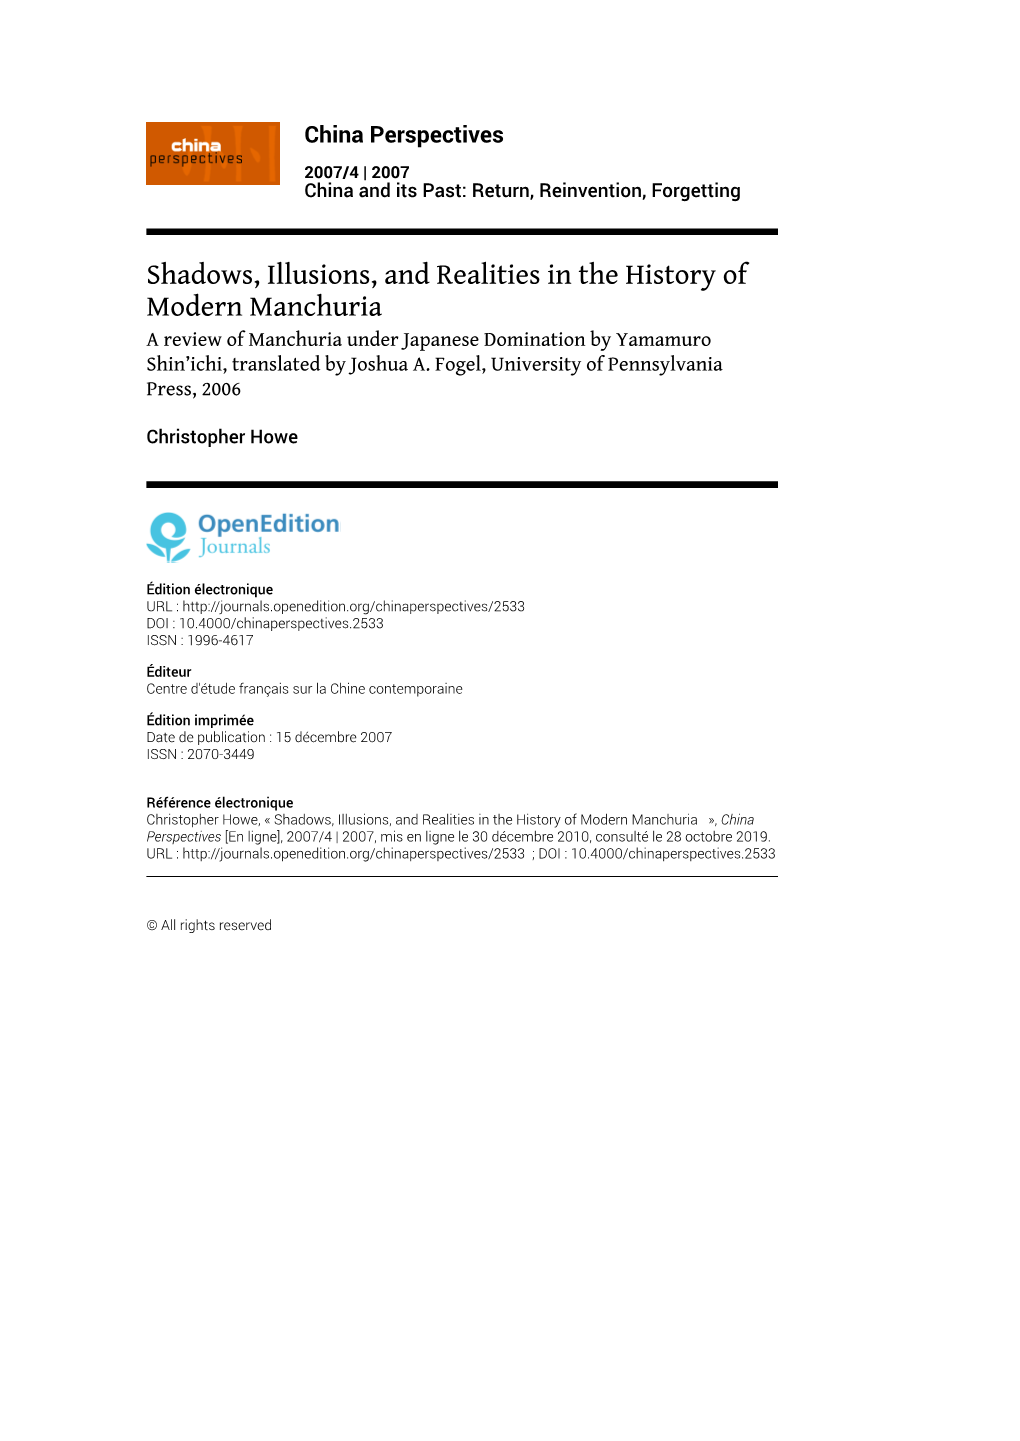 Shadows, Illusions, and Realities in the History of Modern Manchuria a Review of Manchuria Under Japanese Domination by Yamamuro Shin’Ichi, Translated by Joshua A